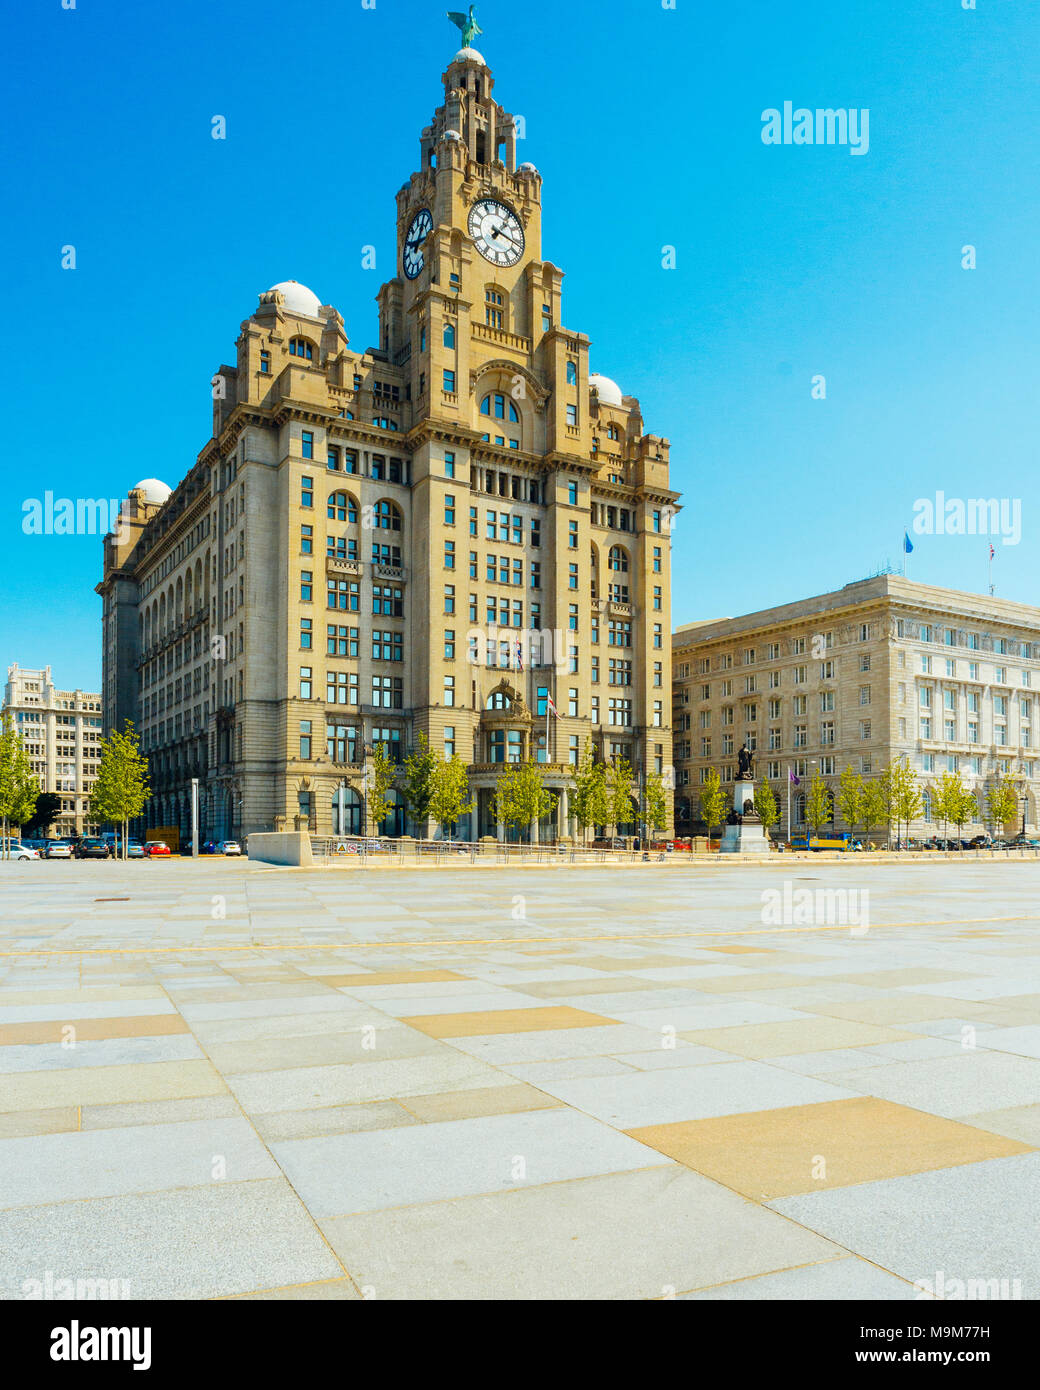 The Liver Building and Cunard Building, two of the ‘Three Graces’ at Liverpool’s famous Pier Head Stock Photo